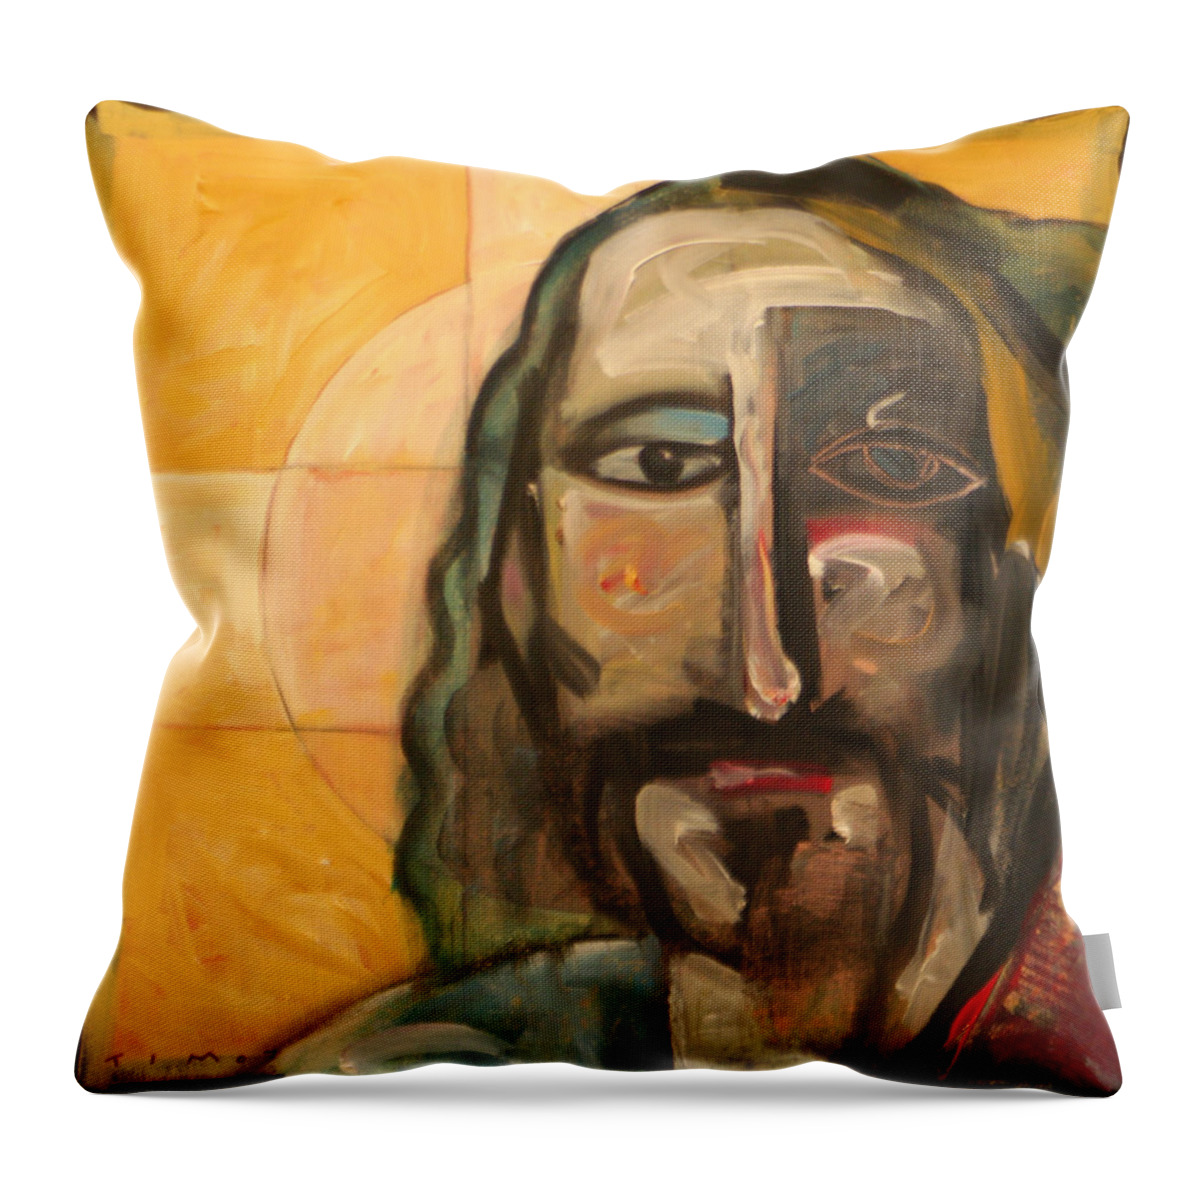  Christ Throw Pillow featuring the painting Icon Number Four by Tim Nyberg